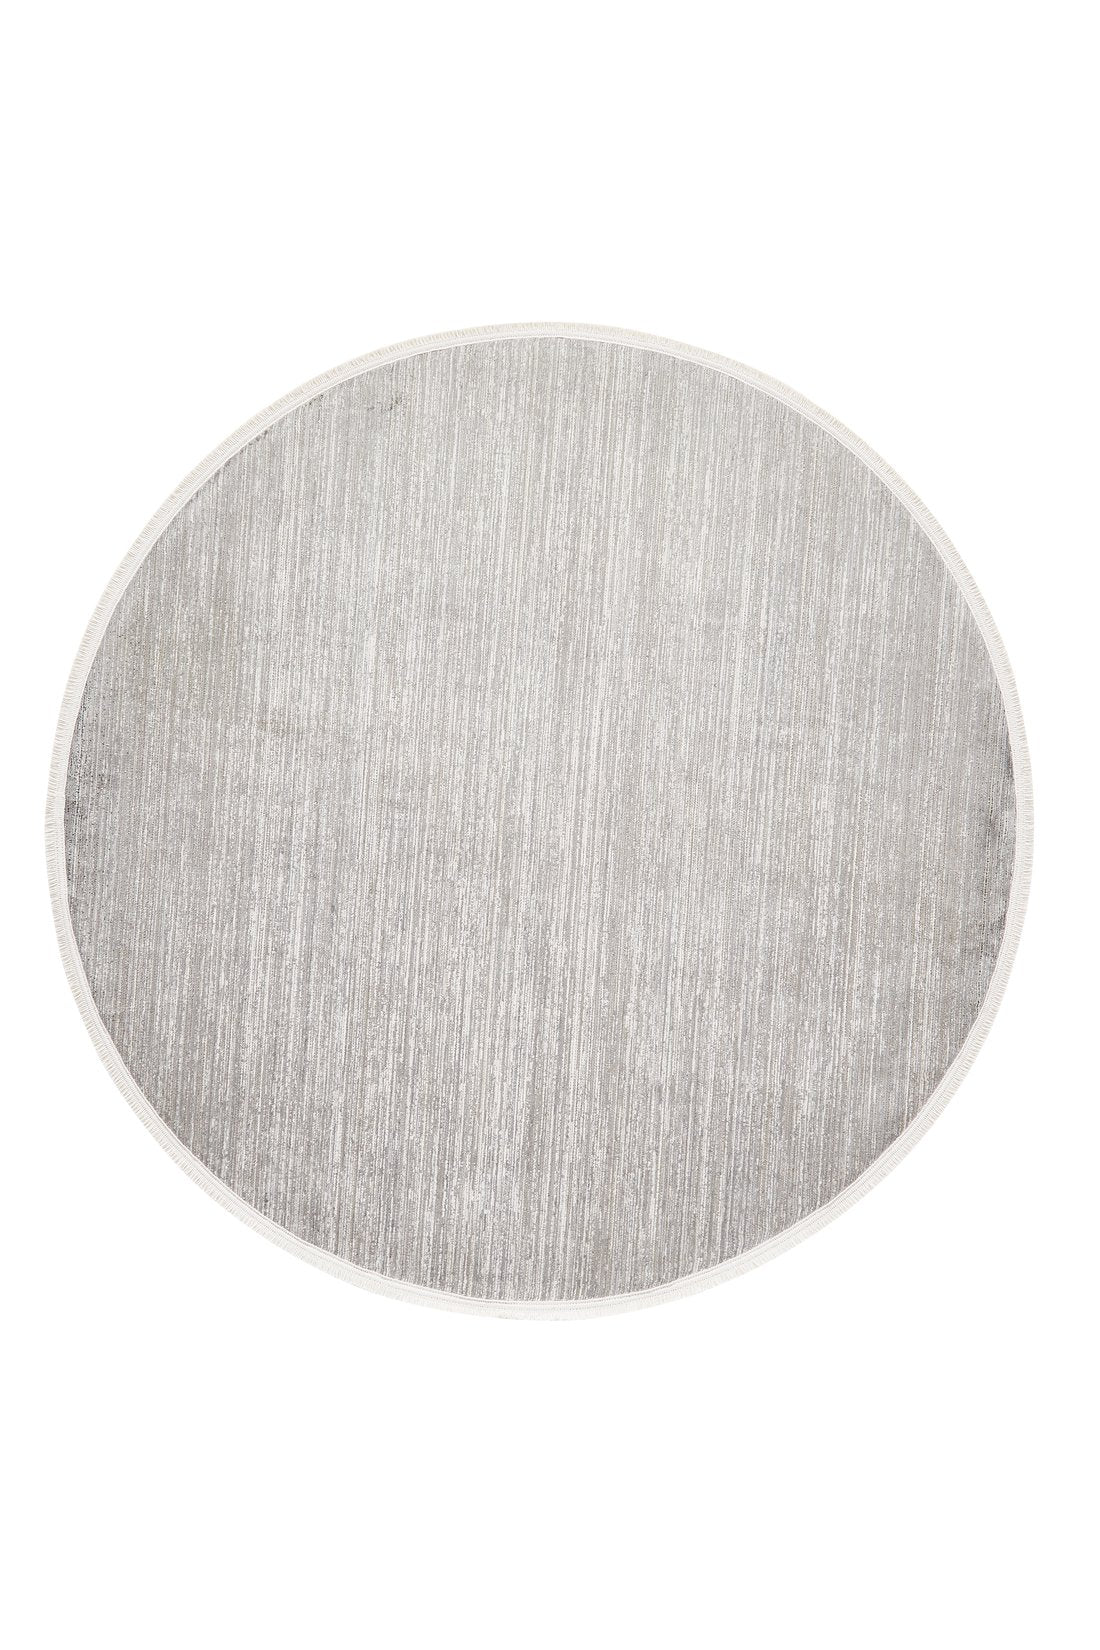 Muted Palette Grey Ombre Rug - EW2636